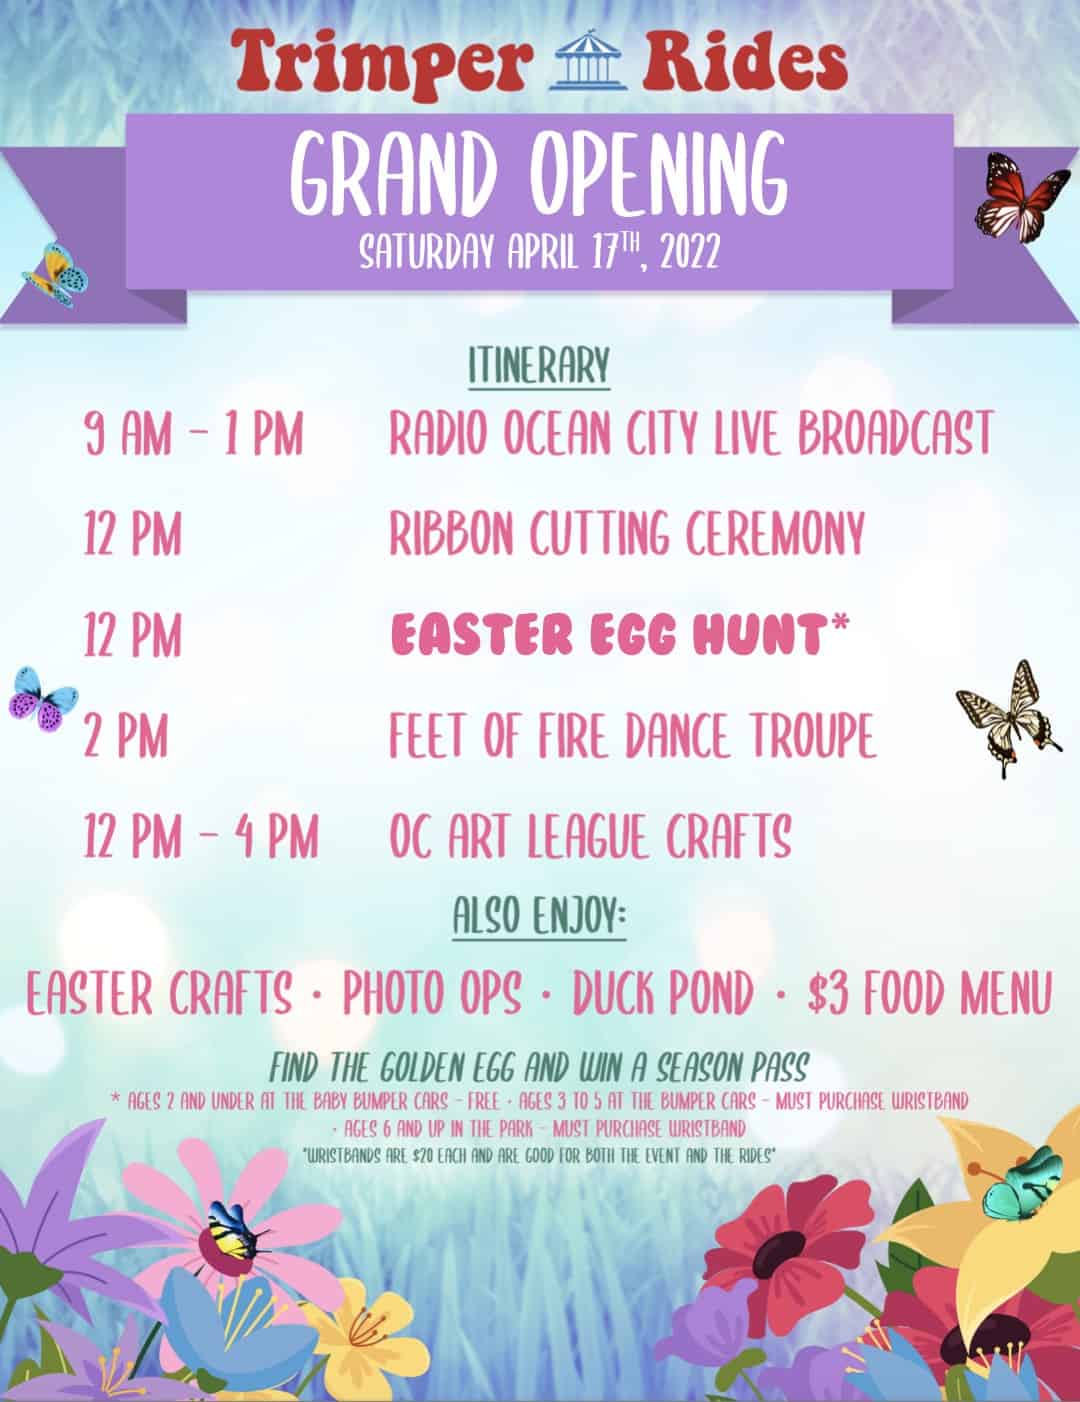 Trimper Rides of Ocean City Grand Reopening